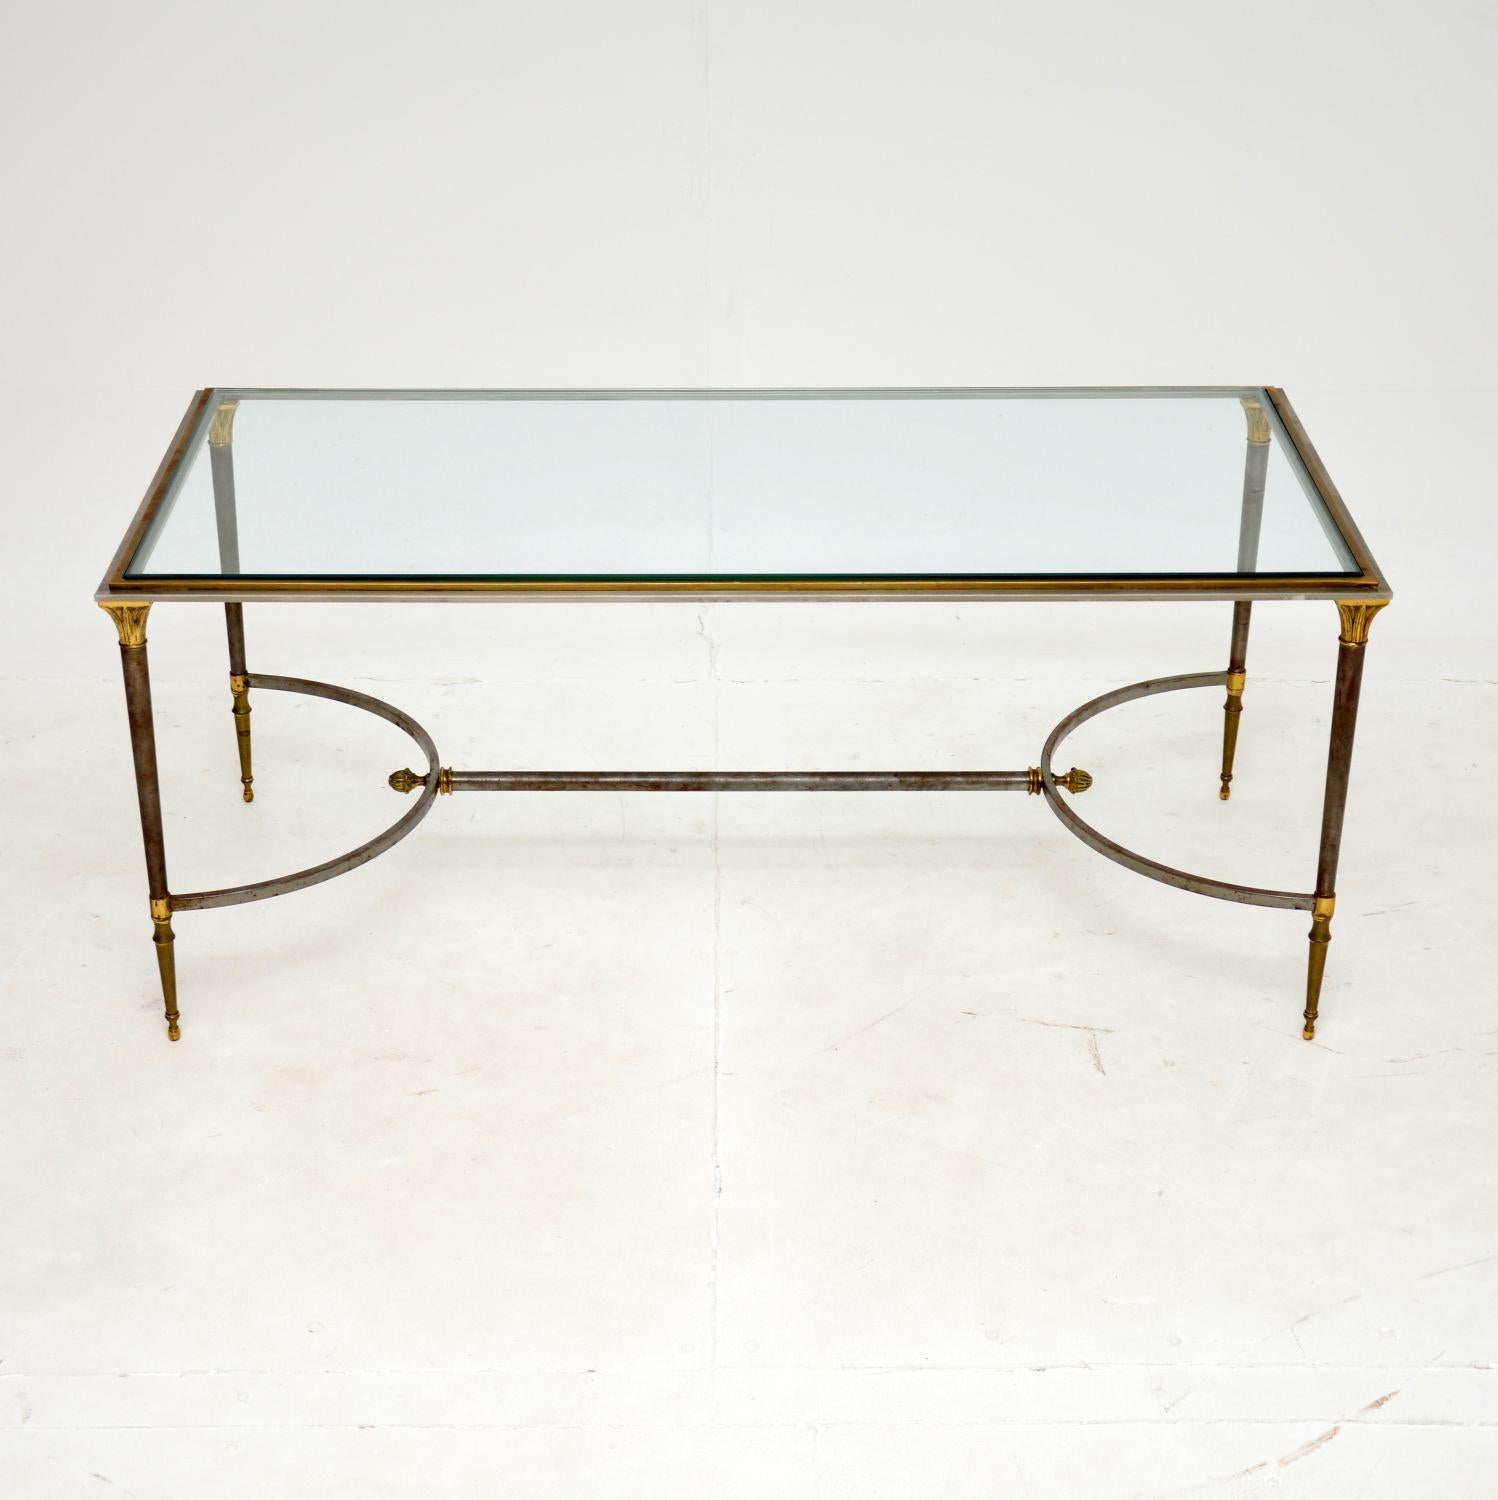 A stunning vintage coffee table of magnificent quality. This was made in France, it dates from around the 1970’s.

The frame is steel with a brass rim around the top and gold leaf embellishments on the base. It has beautiful details like acorn